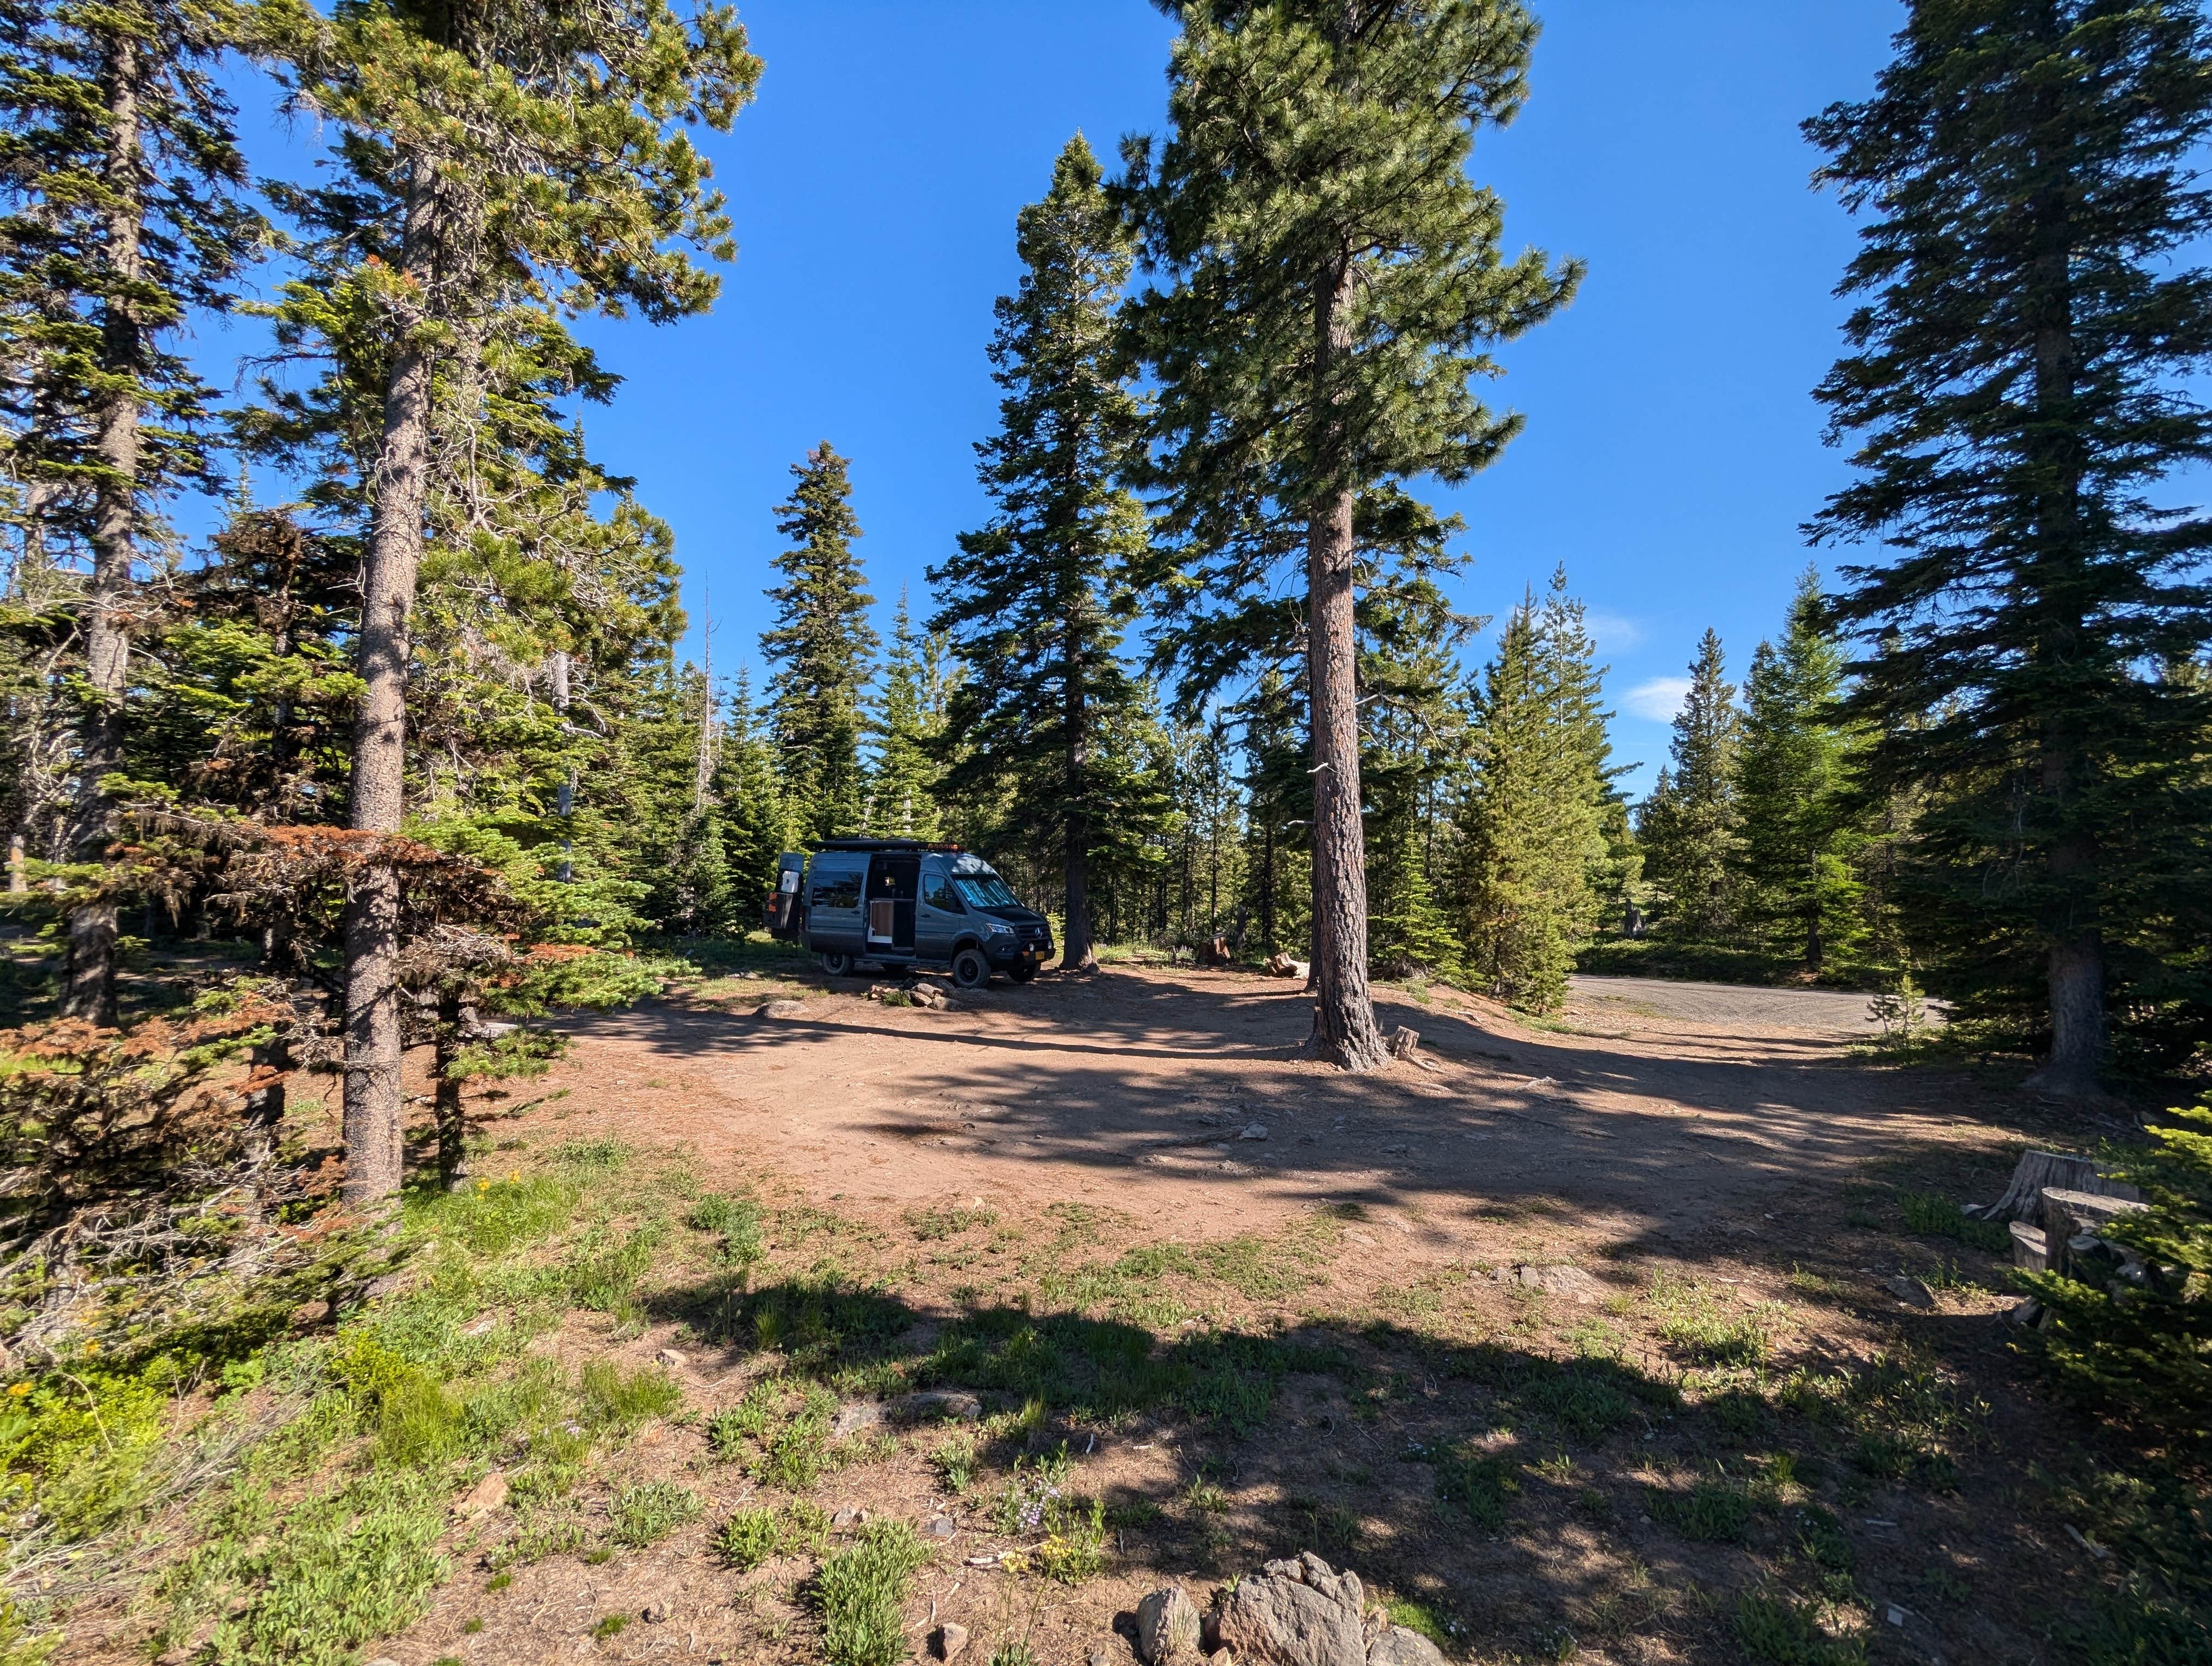 Camper submitted image from Forest Rd 2730 - Mt Hood NF - 2